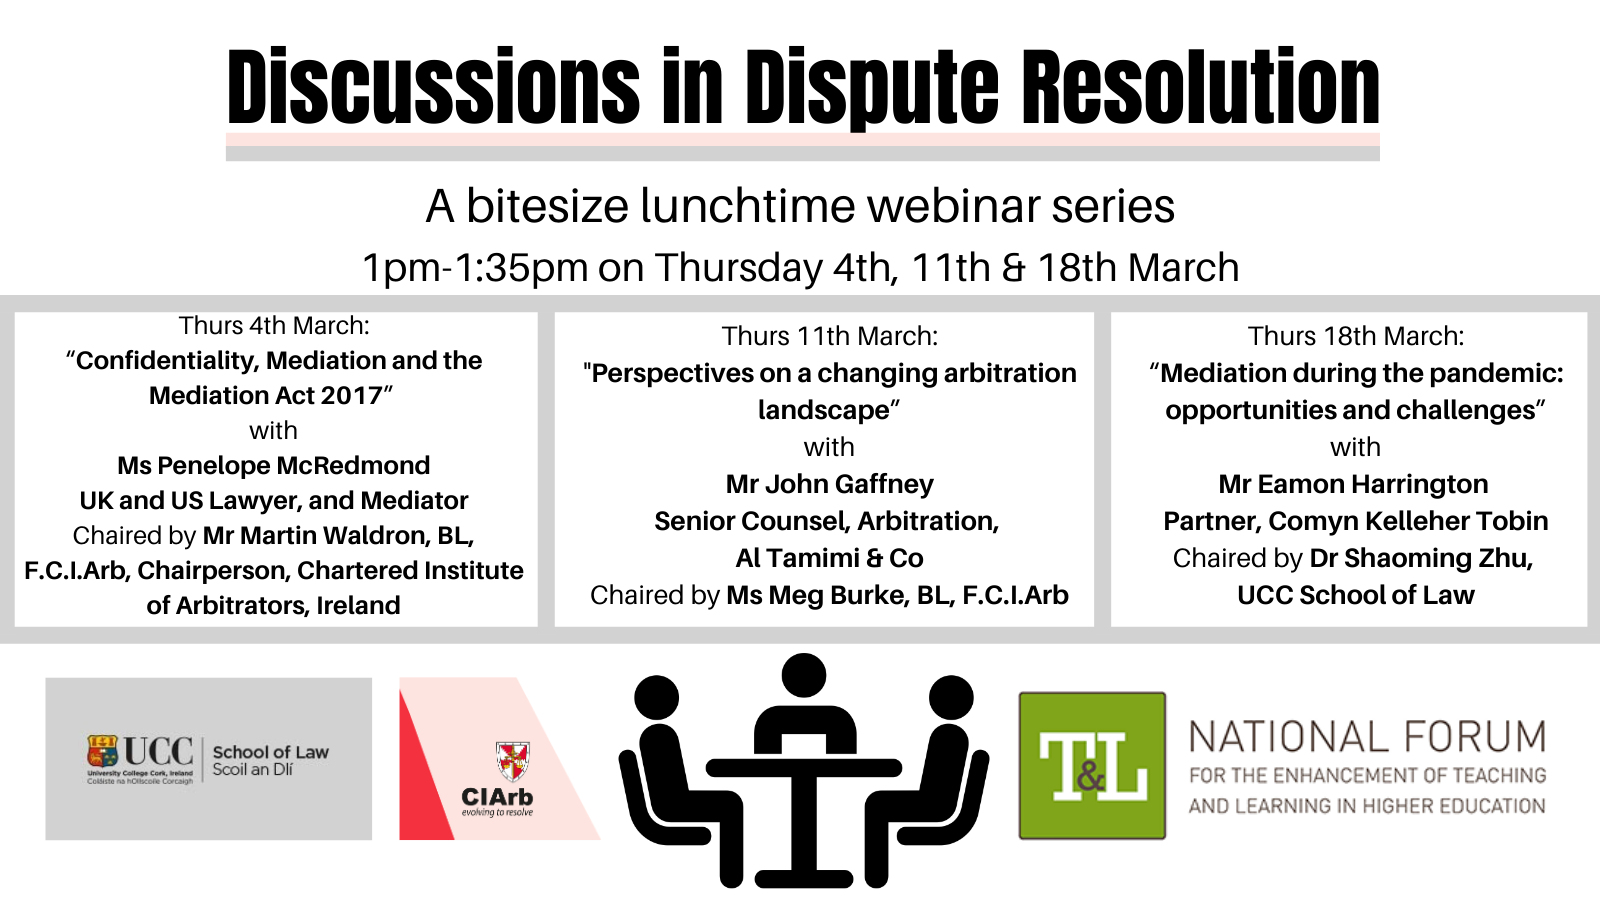 Register Now! “Discussions in Dispute Resolution” – A Bitesize Lunchtime Webinar Series